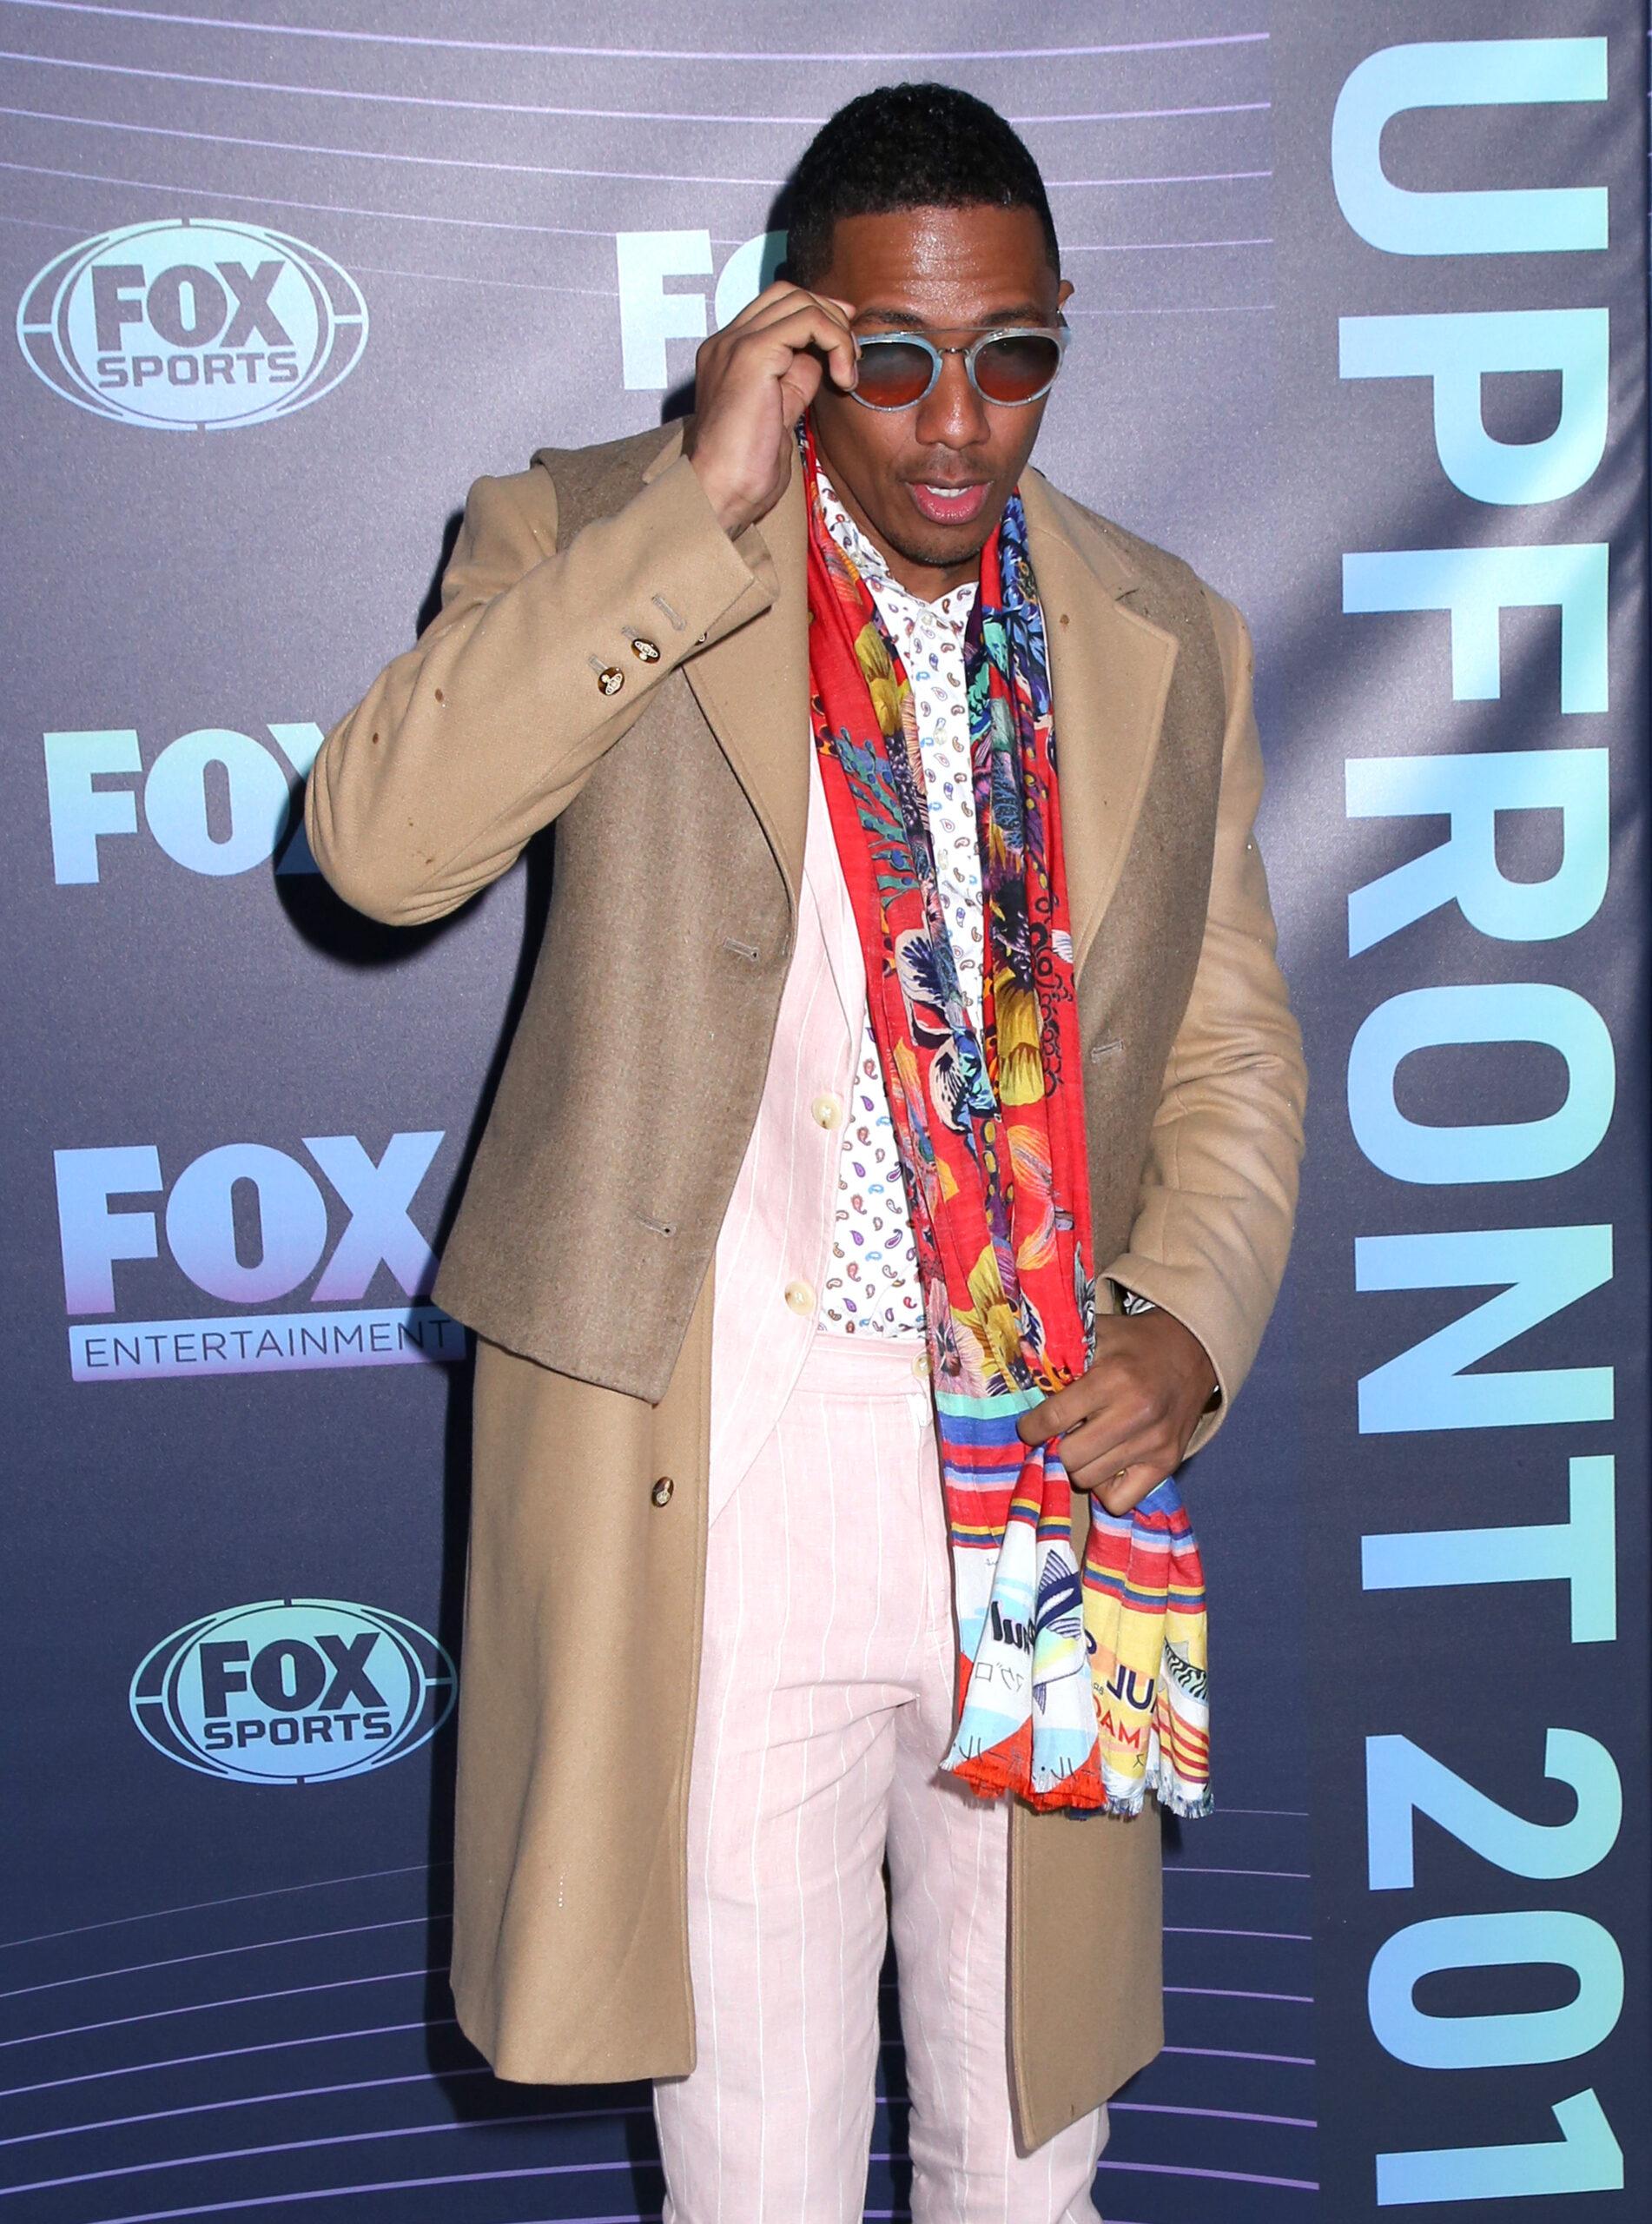 Nick Cannon at the FOX Networks 2019 Upfront